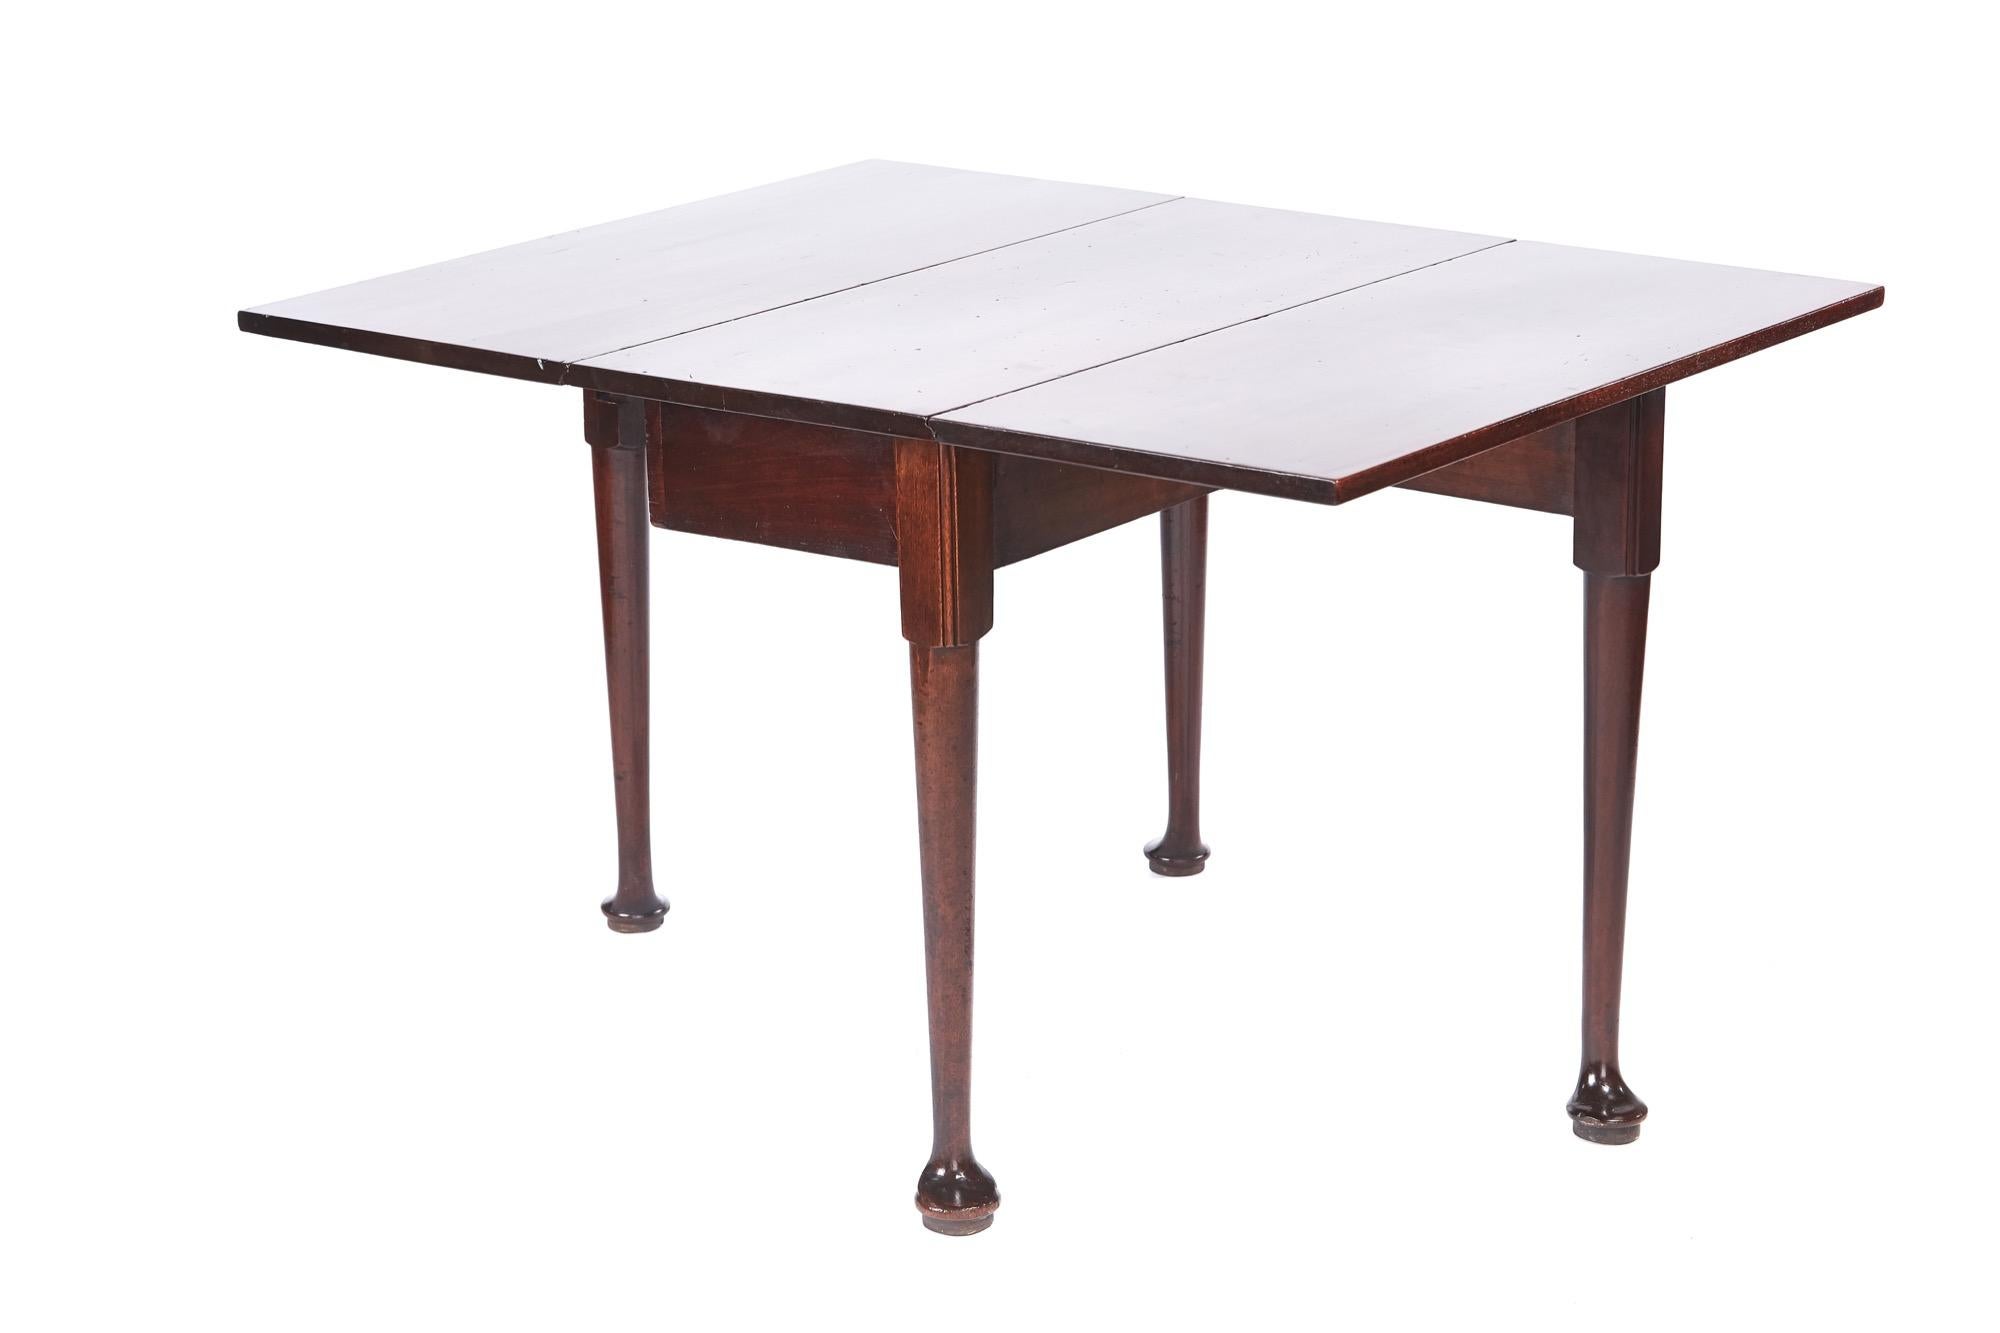 Georgian antique mahogany drop-leaf dining table which has a quality solid mahogany top with two drop leaves, supported by turned legs with pad feet.

In lovely original condition.

 